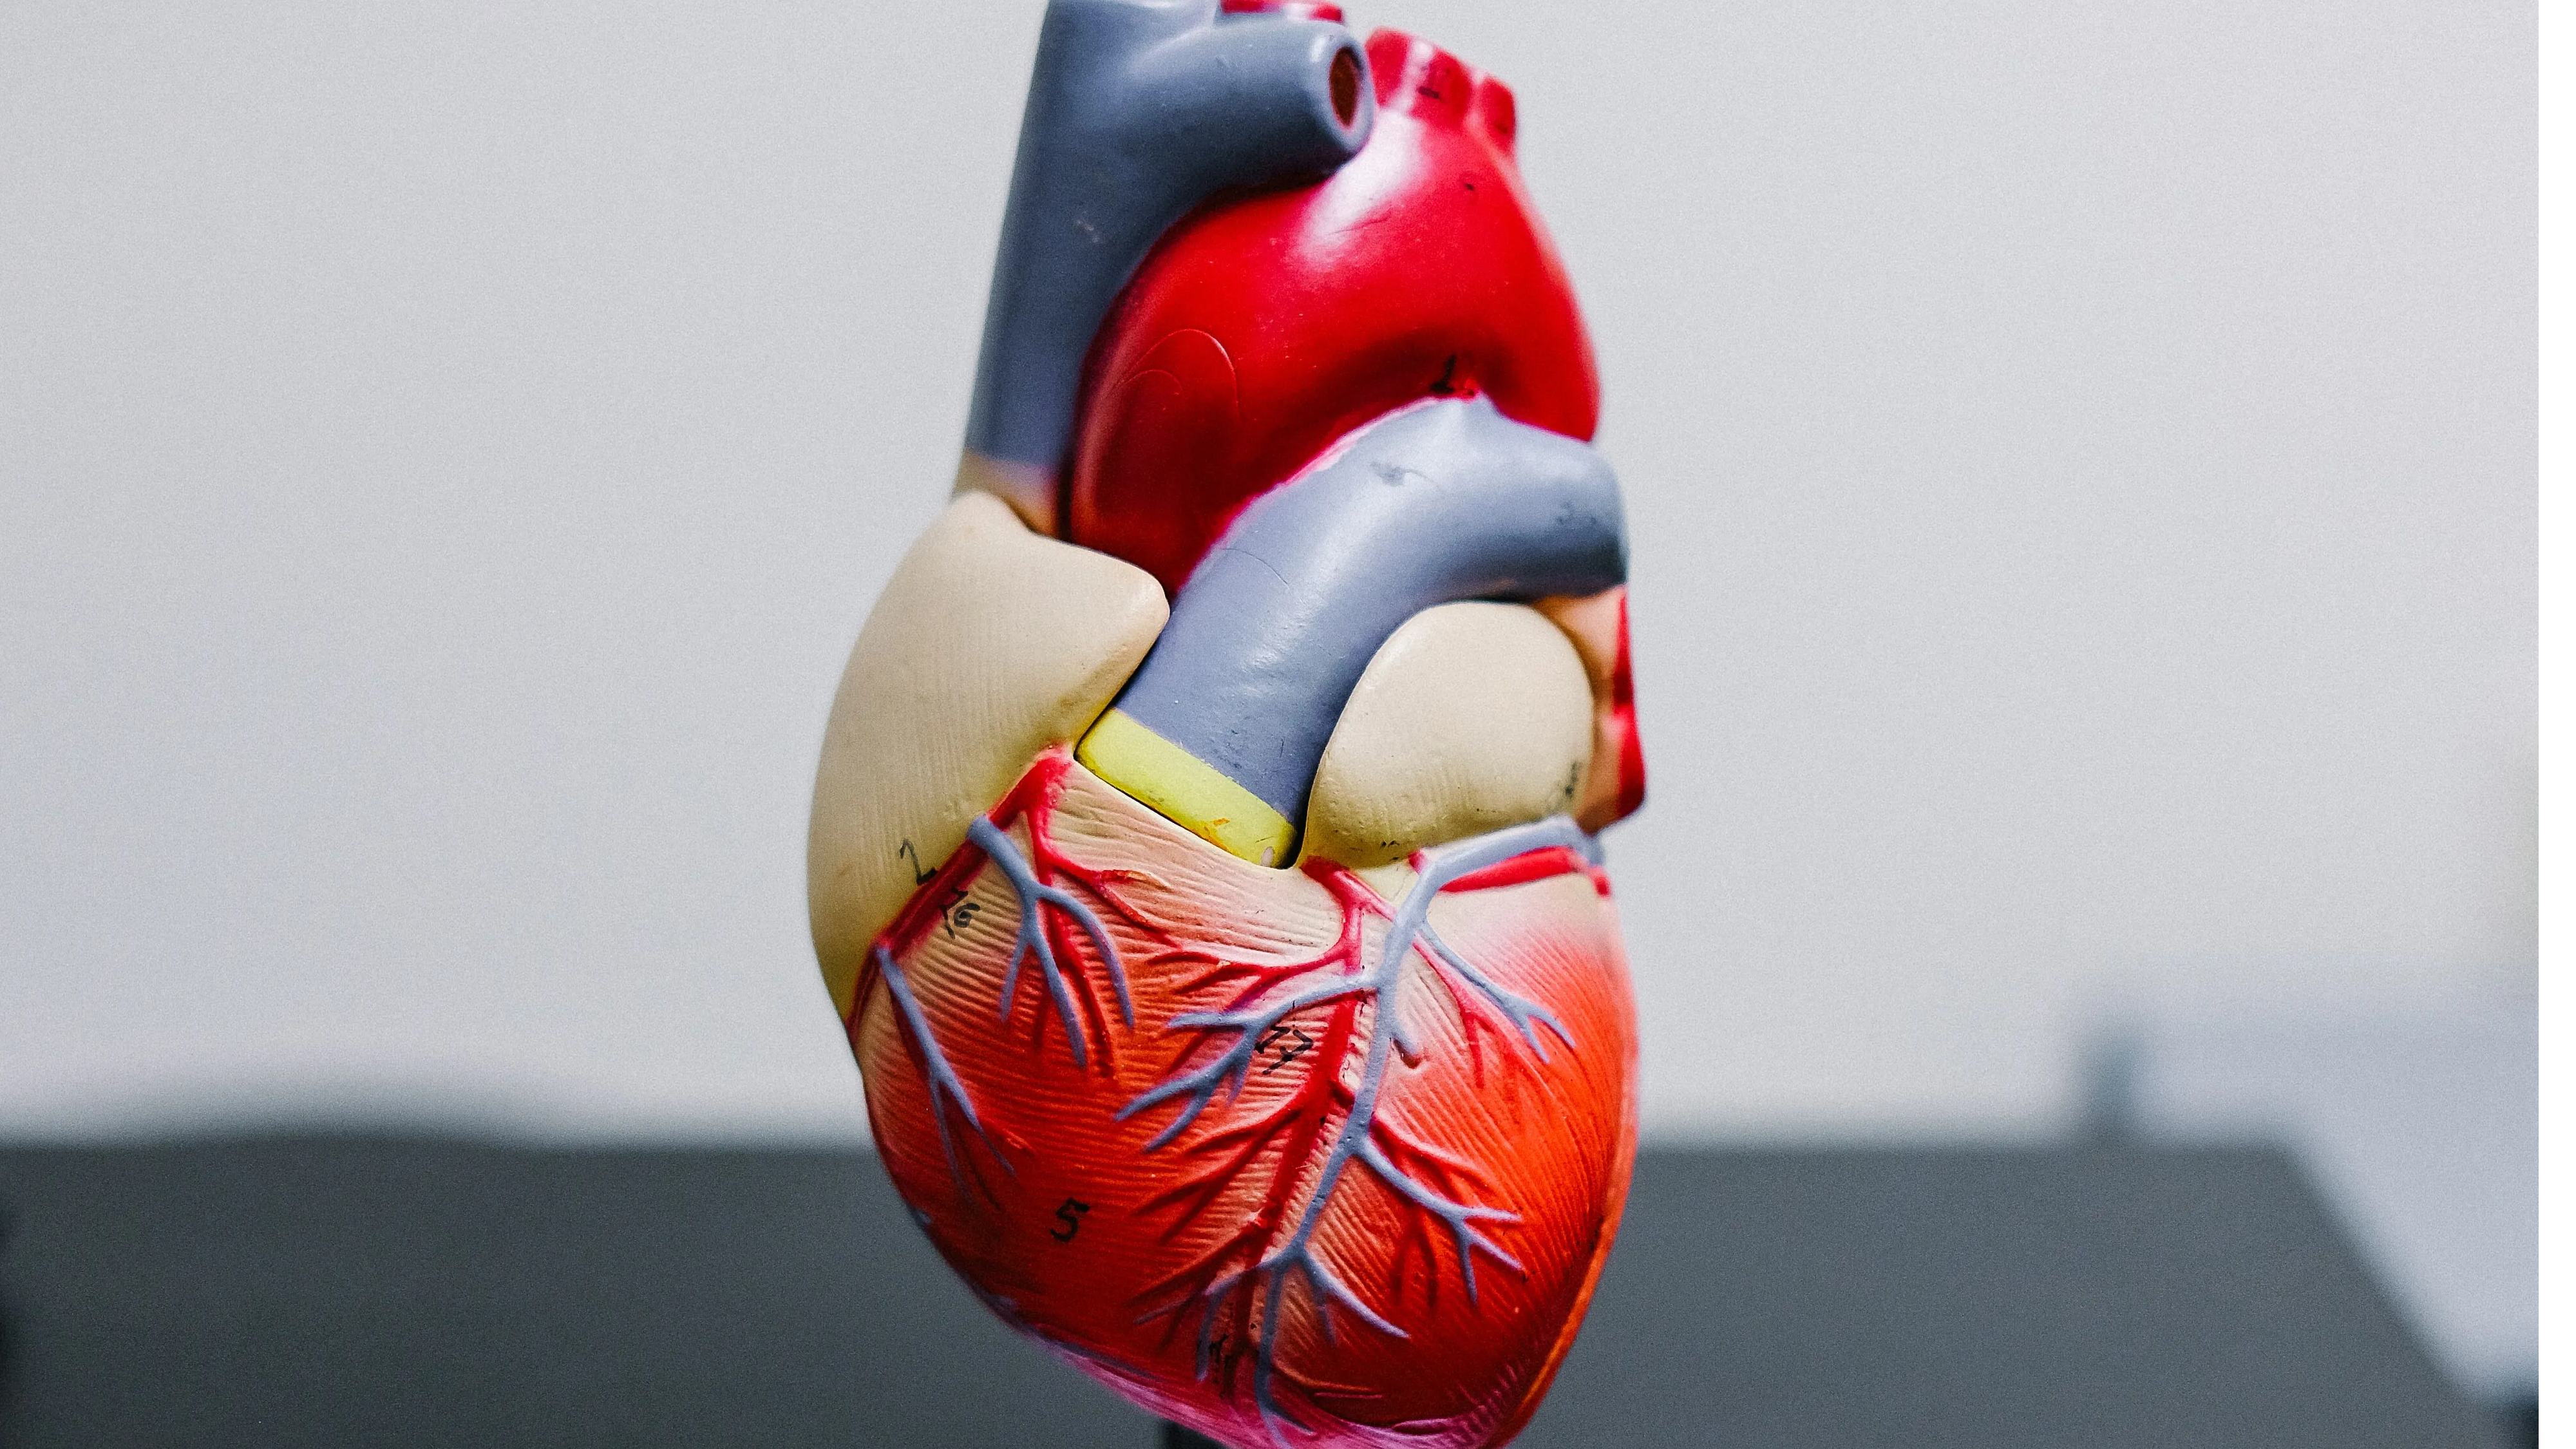 Aortic Stenosis: All you need to know about the heart condition